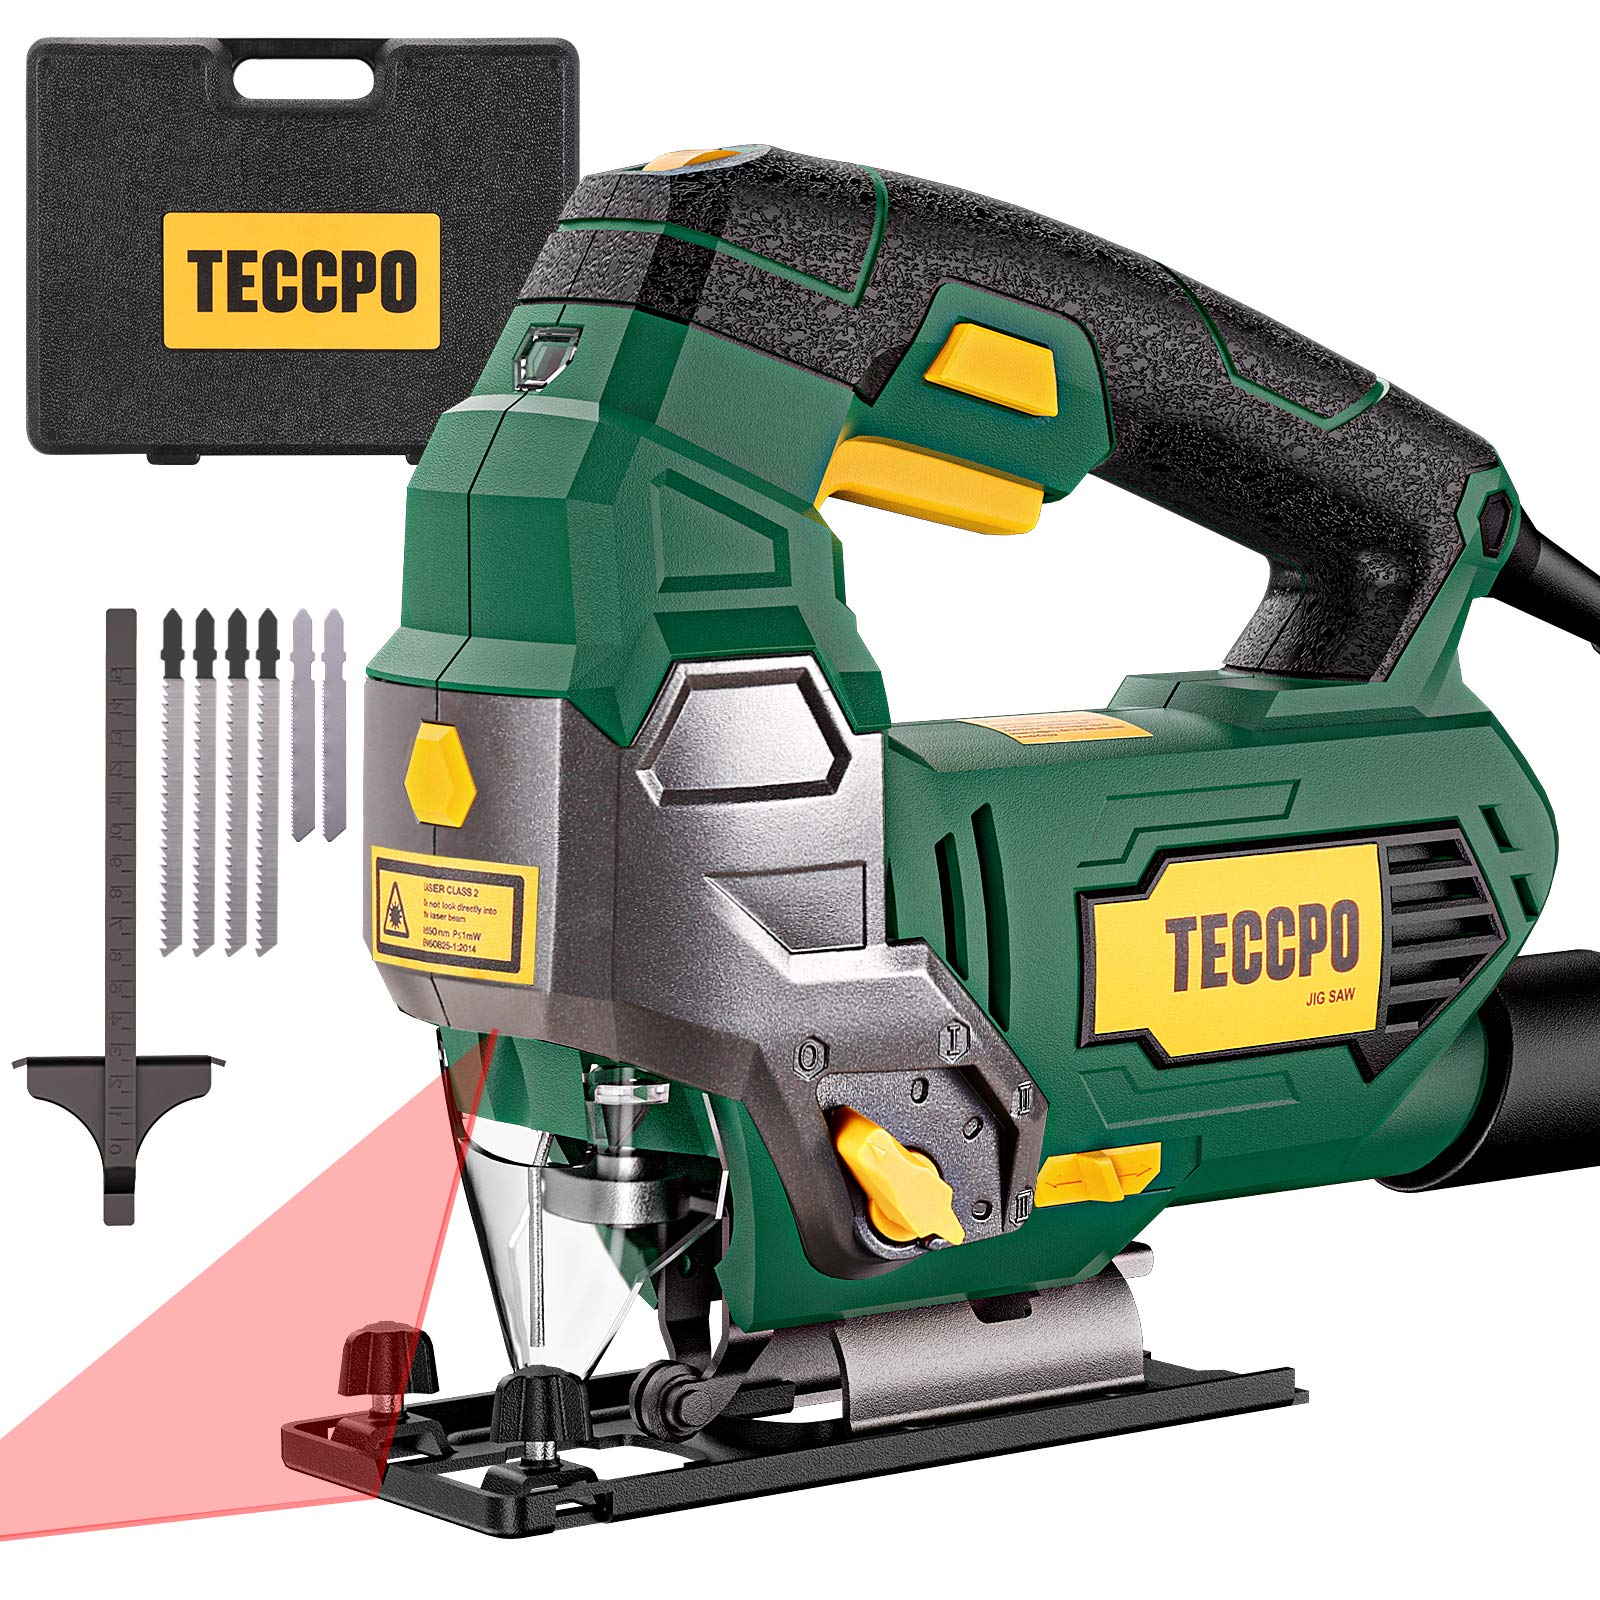 Jigsaw, TECCPO 6.5 Amp 3000 SPM Jig Saw with Laser, 6 Variable Speed, 6 Blades, ±45° Bevel Cutting, 4 Orbital Settings, Pure Copper Motor, with Carrying Case - TAJS01P